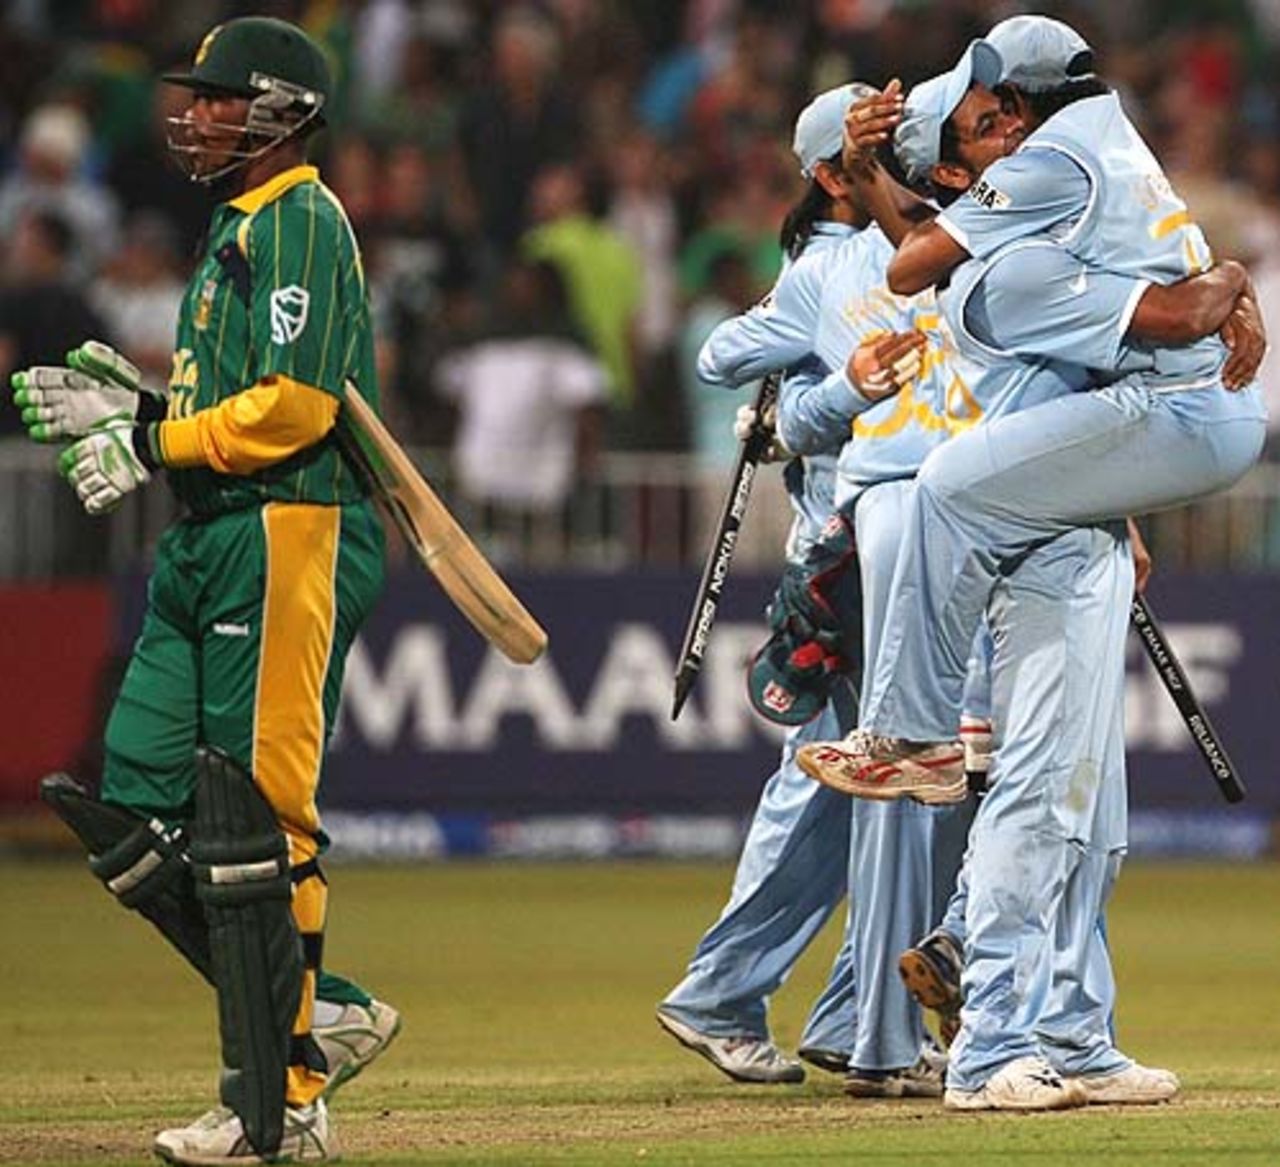 Makhaya Ntini walks off after India completed a 37-run win, India v South Africa, Group E, ICC World Twenty20, Durban, September 20, 2007